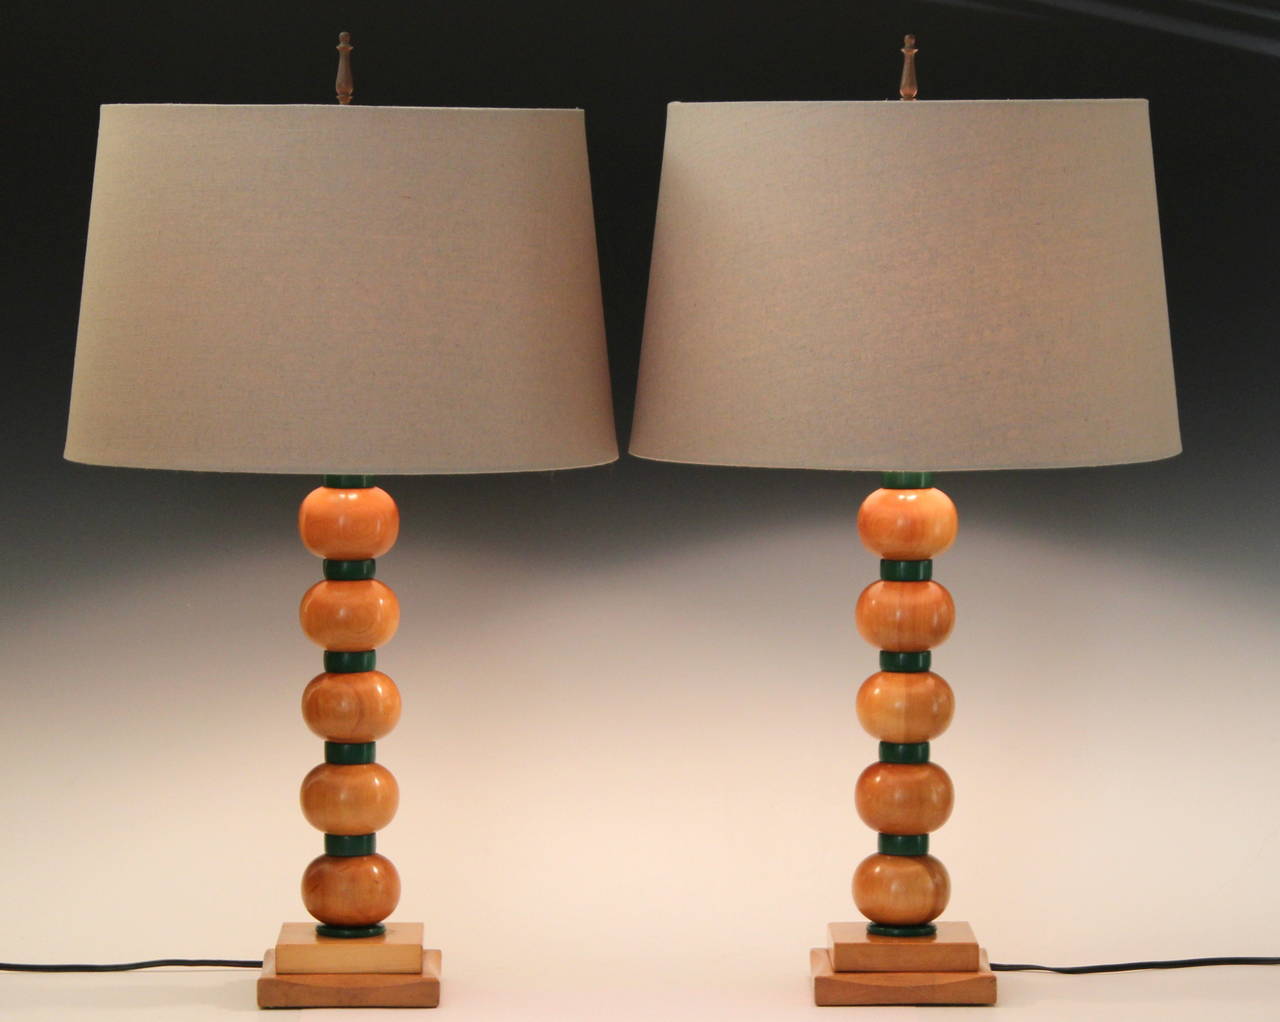 Pair of vintage atomic age lamps consisting of turned maple orbs and discs in the manner of molecular models, circa 1940s. Austrian? Scandinavian? Not sure. 26